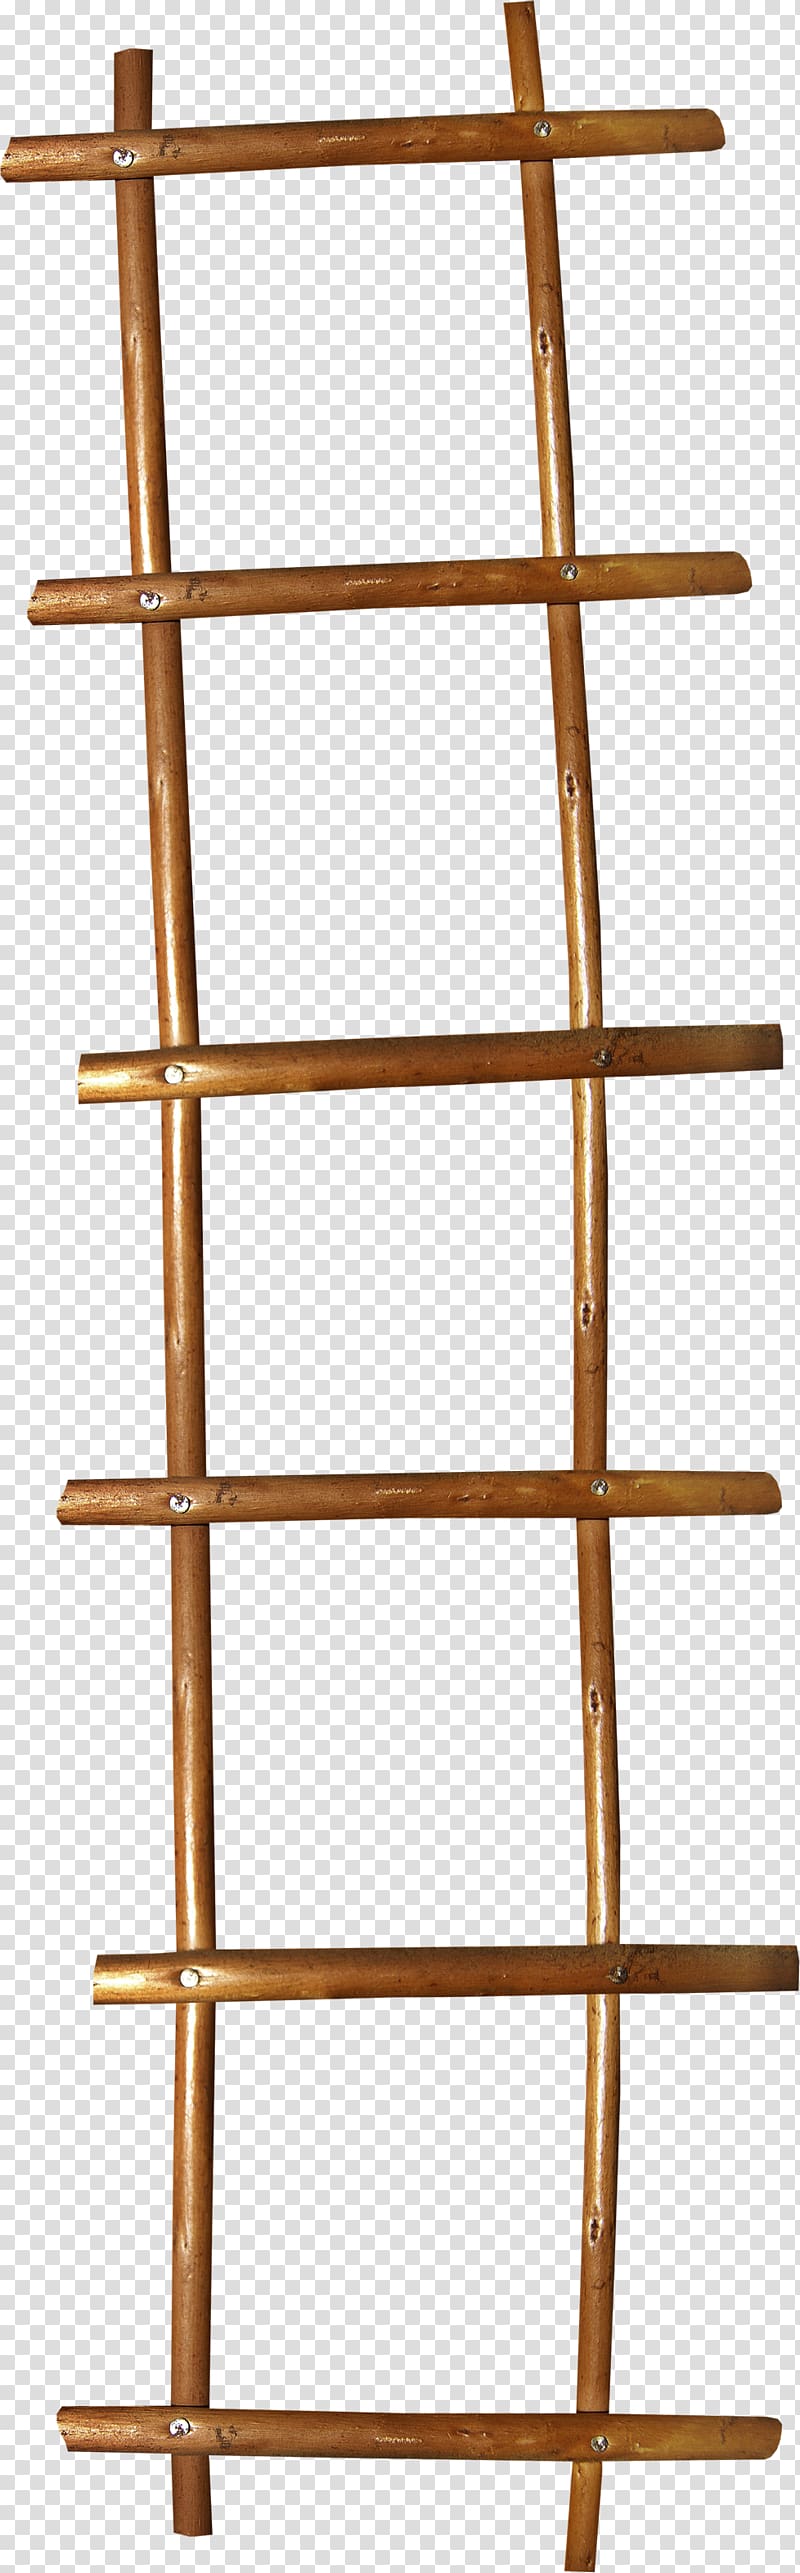 Ladder Wood Stairs Rope, Pretty brown wooden ladder transparent background PNG clipart